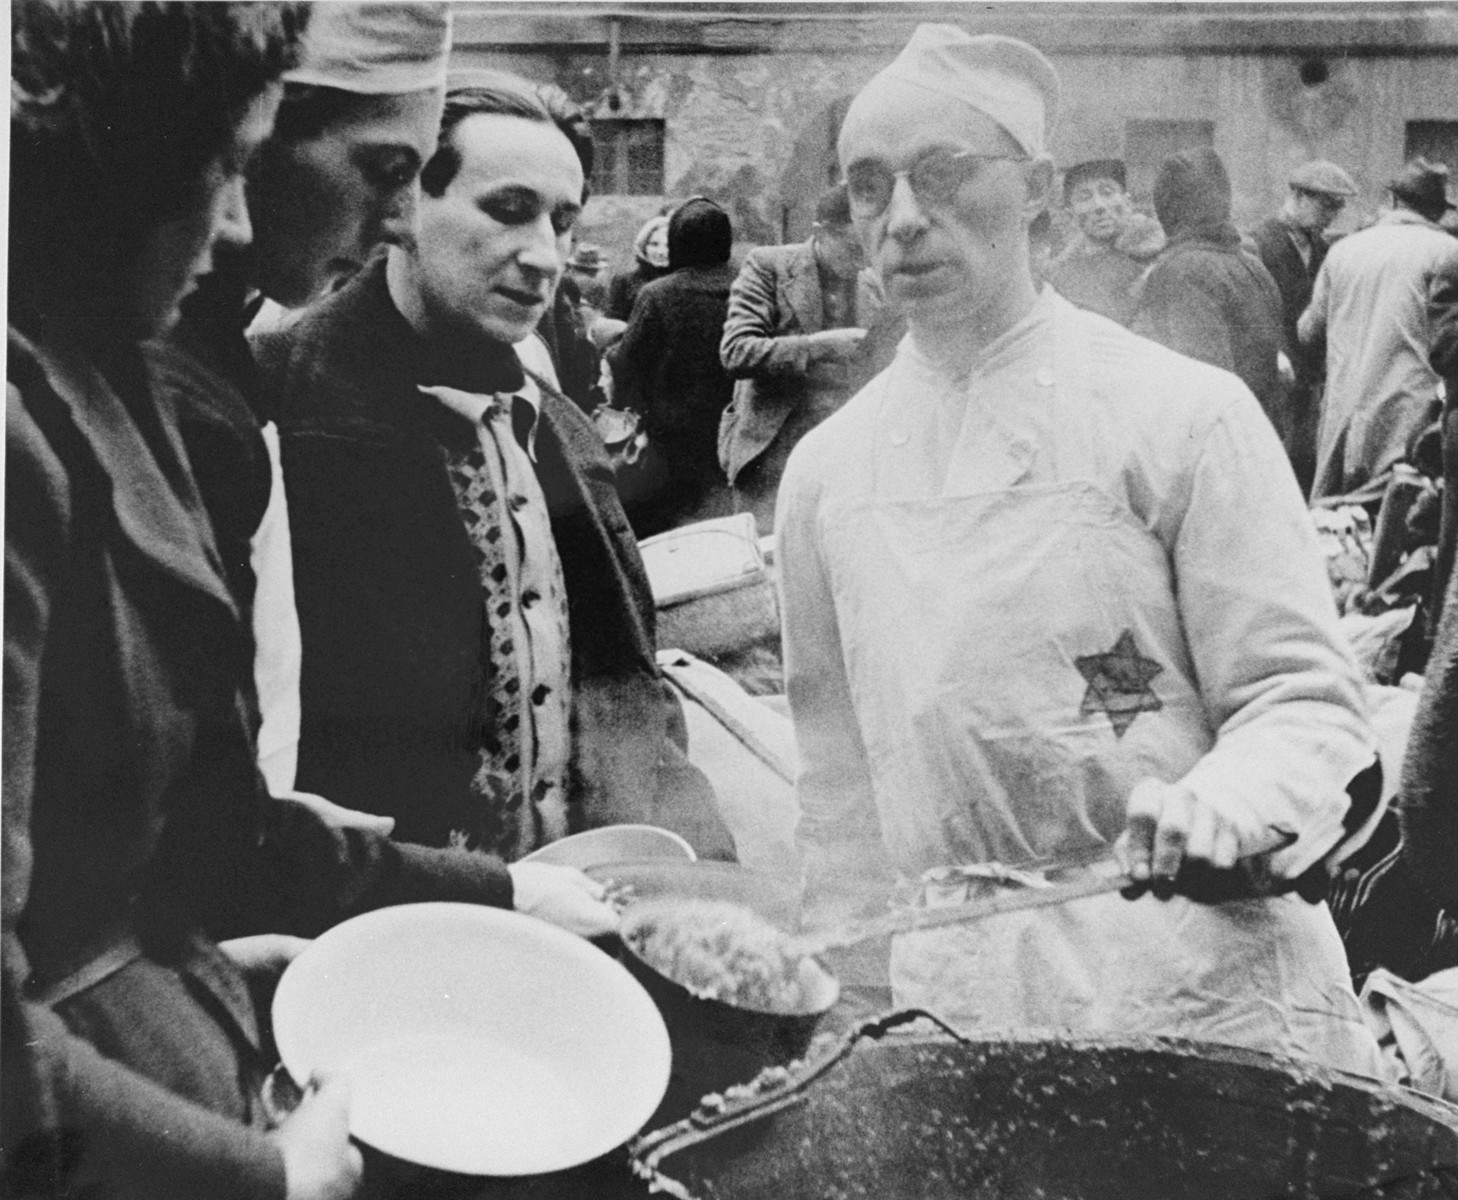 A prisoner wearing a cook's uniform doles out food in the ghetto courtyard to prisoners who have just arrived in Theresienstadt with a transport of Dutch Jews.  [oversized photo] 

The man serving soup is possibly Karel Arnstein.